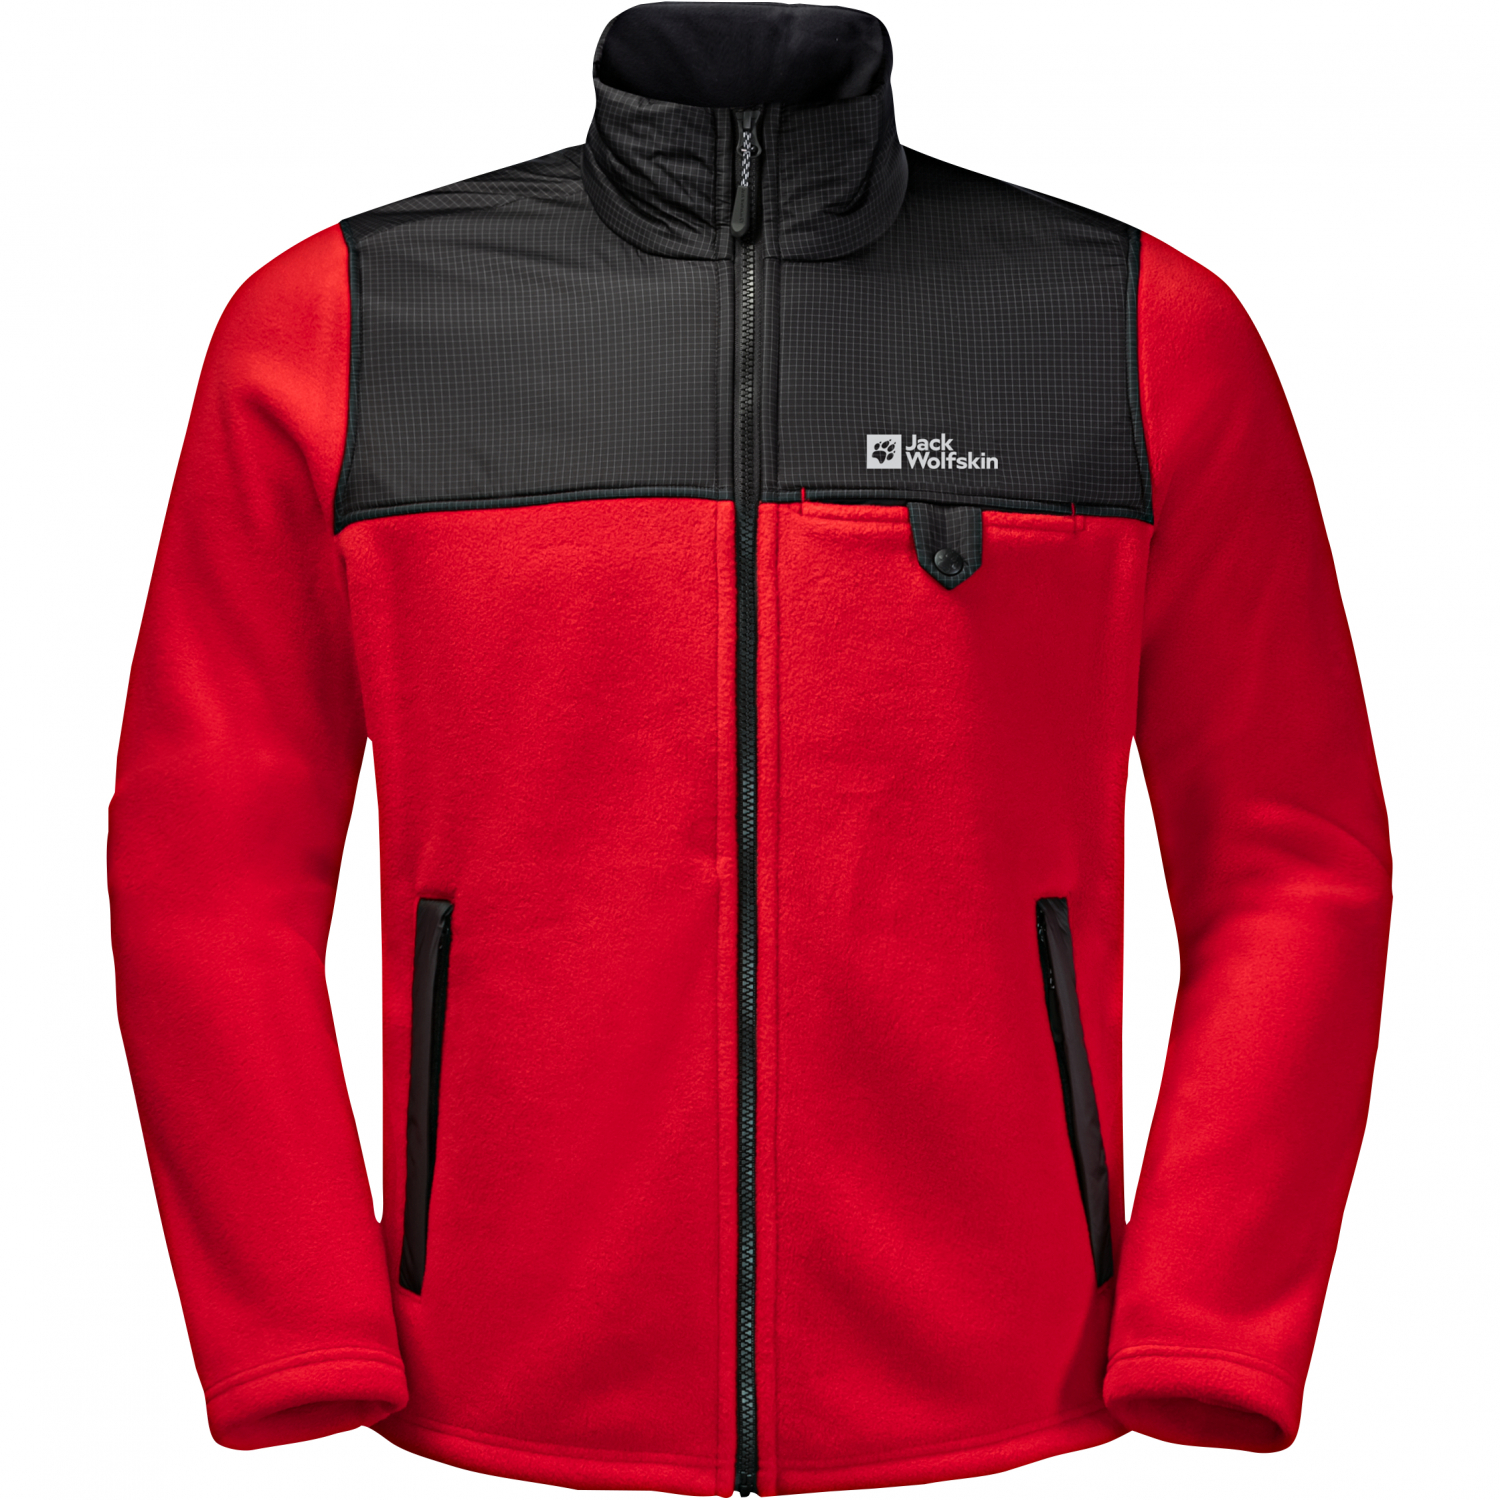 Jack Wolfskin DNA Grizzly fleece jacket (red/black) at low prices | Askari  Fishing Shop